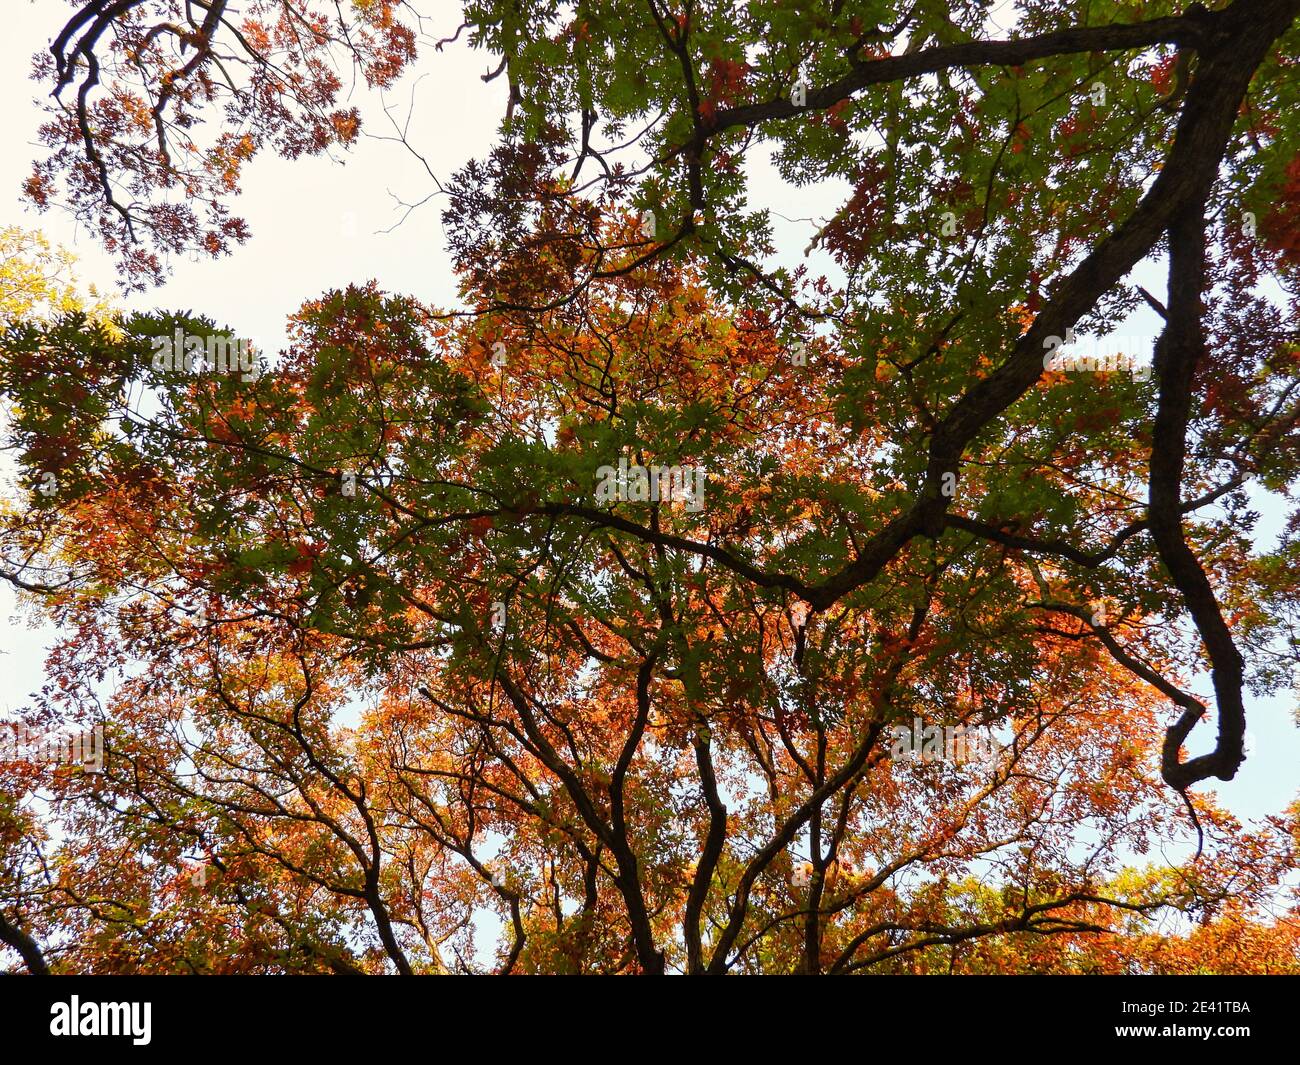 Autumn in the forest: Looking up at an oak tree with different fall colored leaves on a bright sunny day Stock Photo